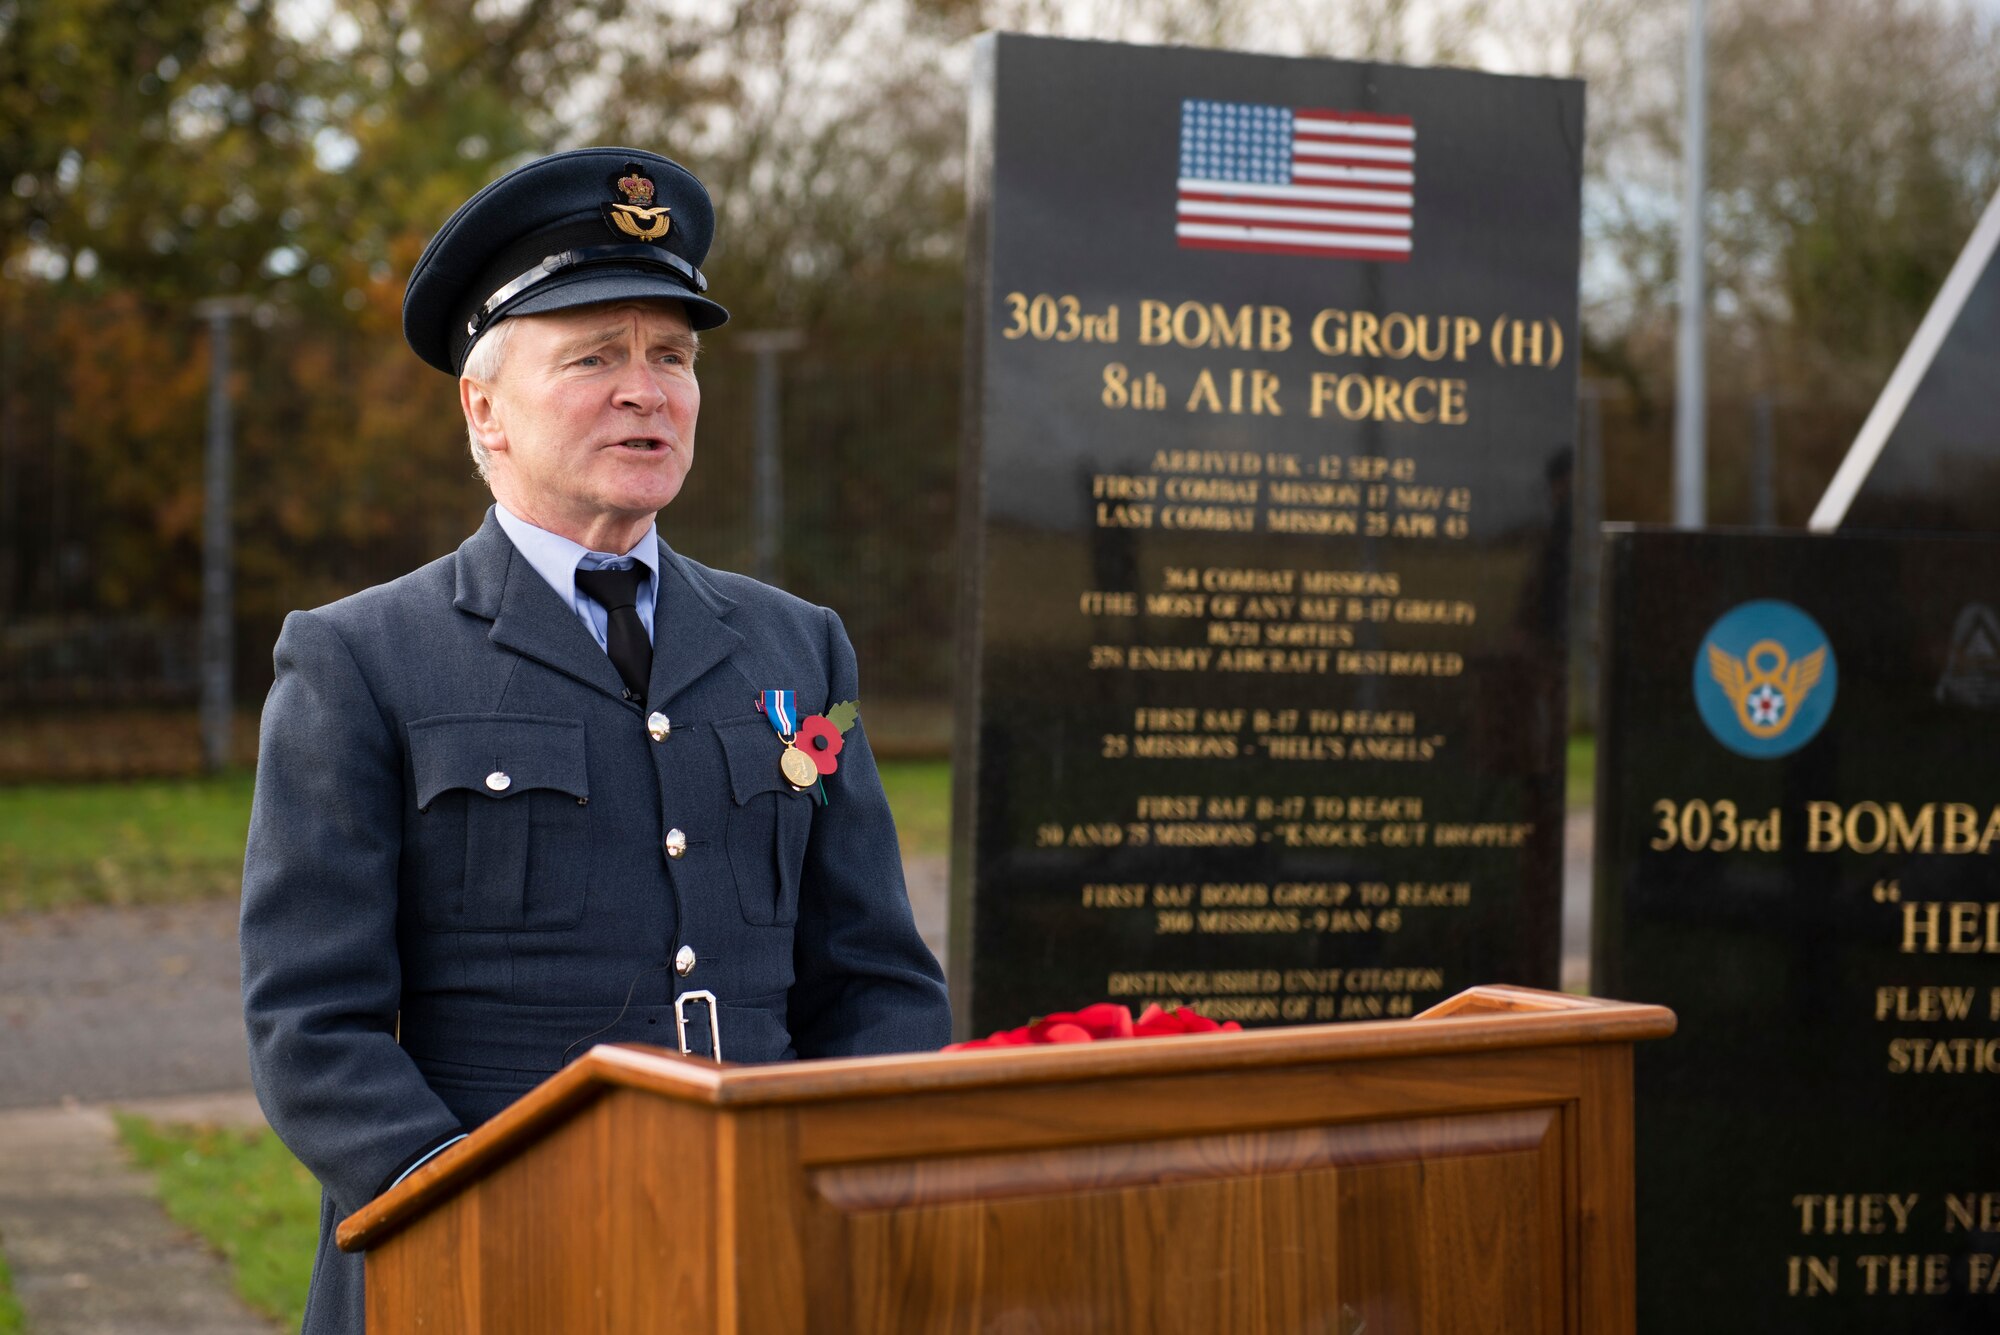 Royal Air Force Sqn. Ldr. Clive Wood, RAF Alconbury and RAF Molesworth RAF commander, reads an excerpt from the poem “For the Fallen,” by Robert Laurence Binyon, during a Remembrance Sunday ceremony near the 303rd Bombardment Group monument at RAF Molesworth, England, Nov. 3, 2020. Remembrance Sunday is commemorated the second Sunday every November to honor the service and sacrifice of Armed Forces, British and Commonwealth veterans, as well as the Allies that fought alongside them in the two World Wars and later conflicts. (U.S. Air Force photo by Senior Airman Jennifer Zima)